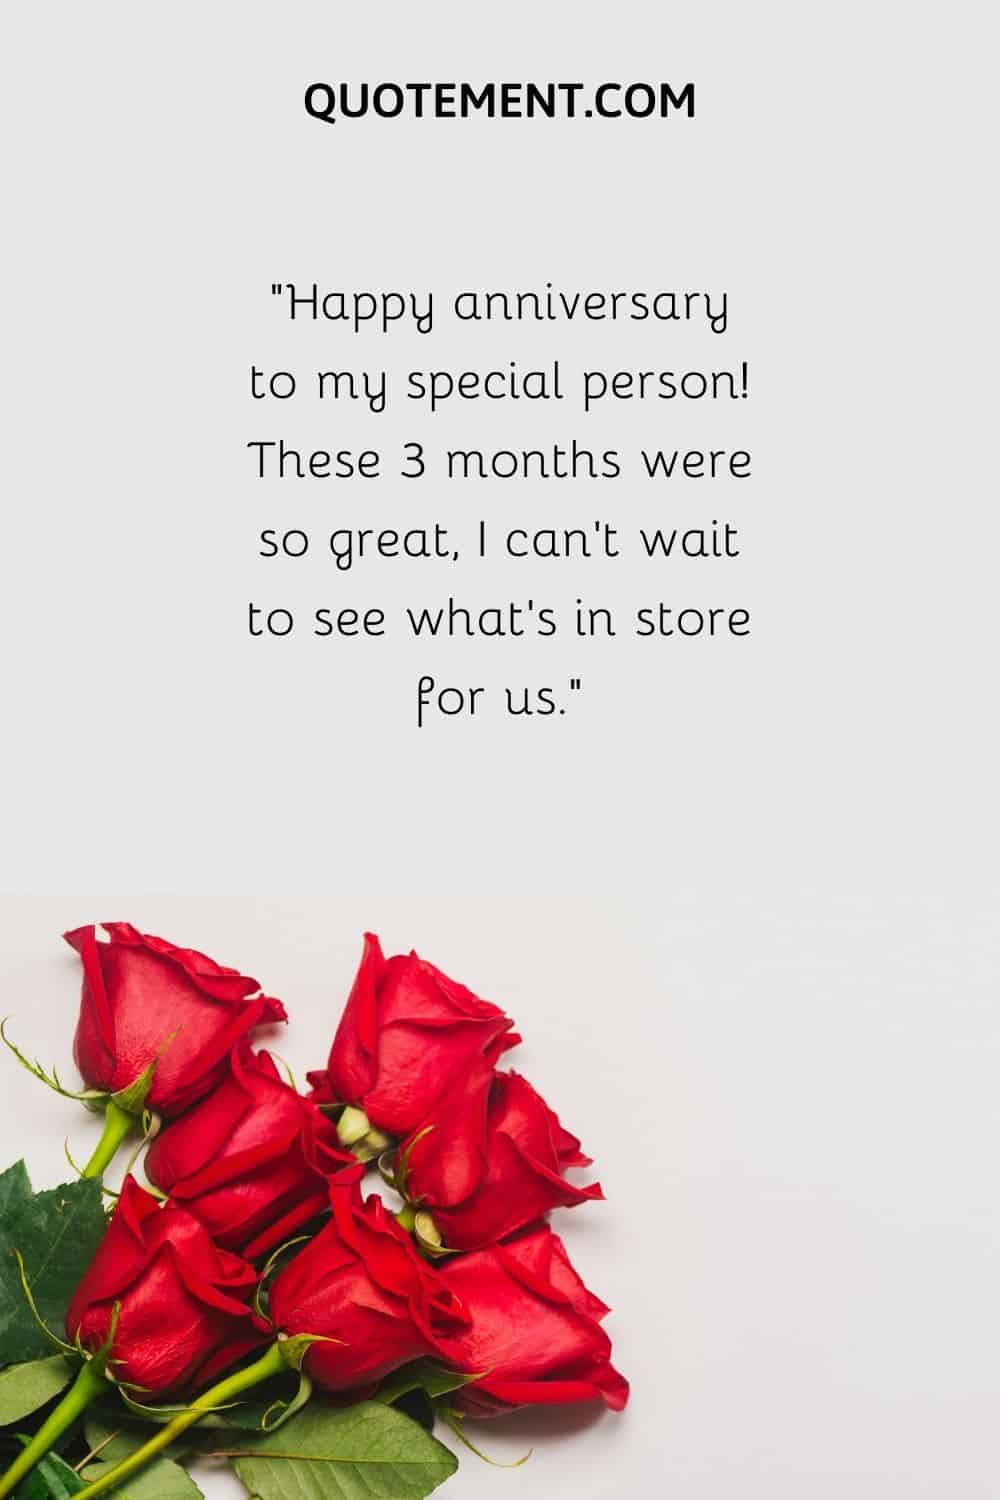 “Happy anniversary to my special person!